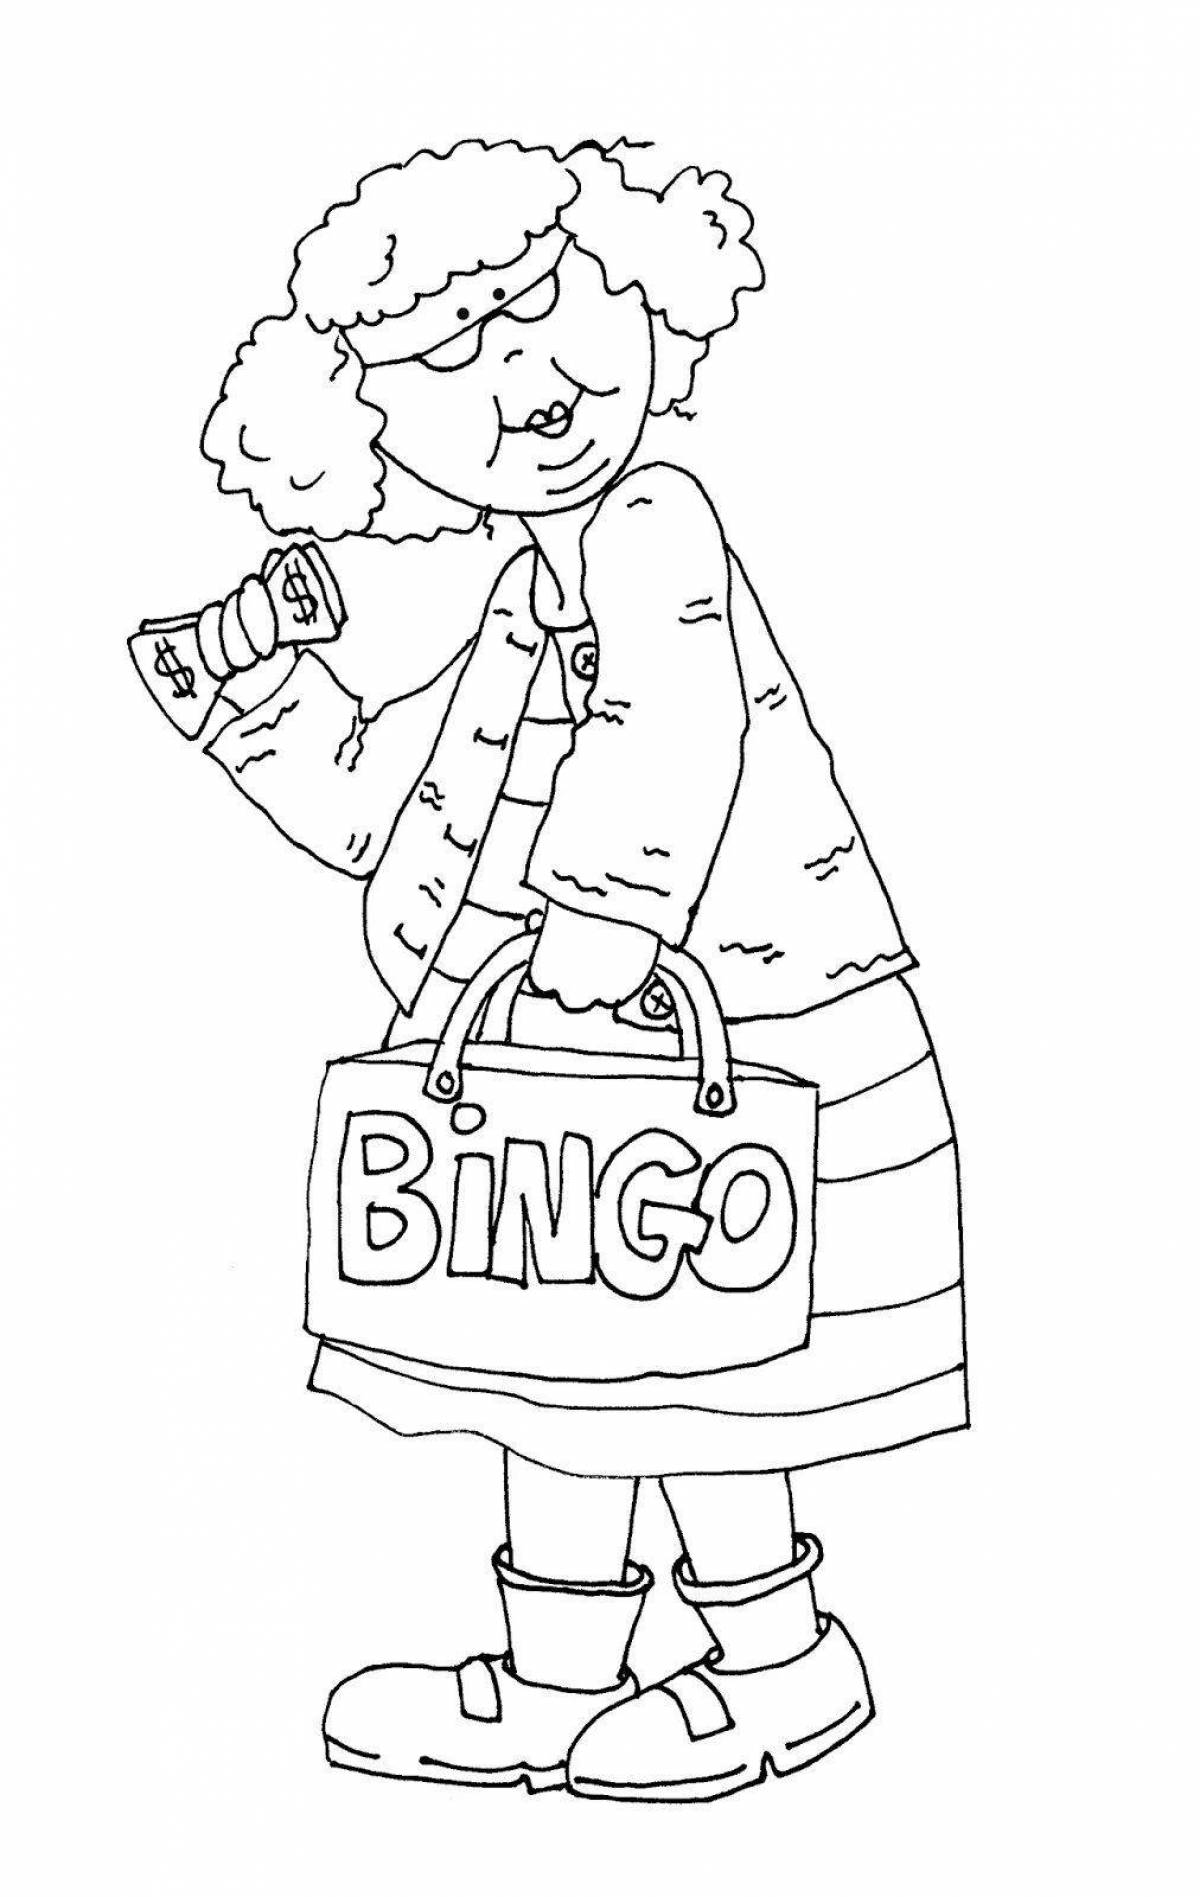 Attractive grandparents coloring page